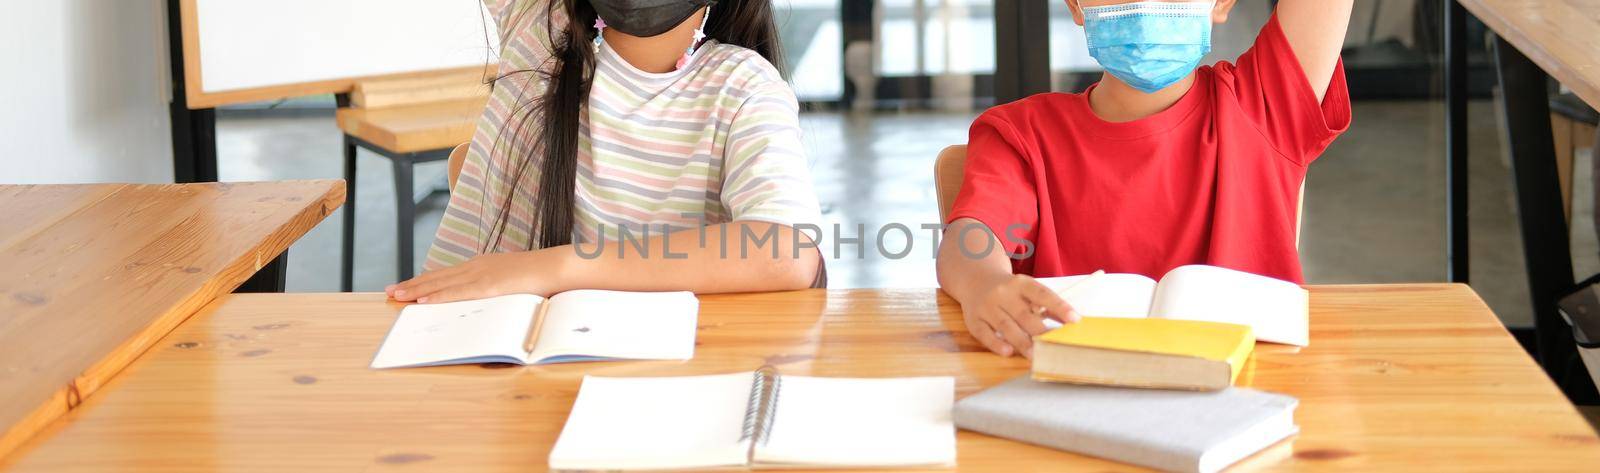 girl boy student wearing face mask studying raising hand in classroom. learning education at school by pp99